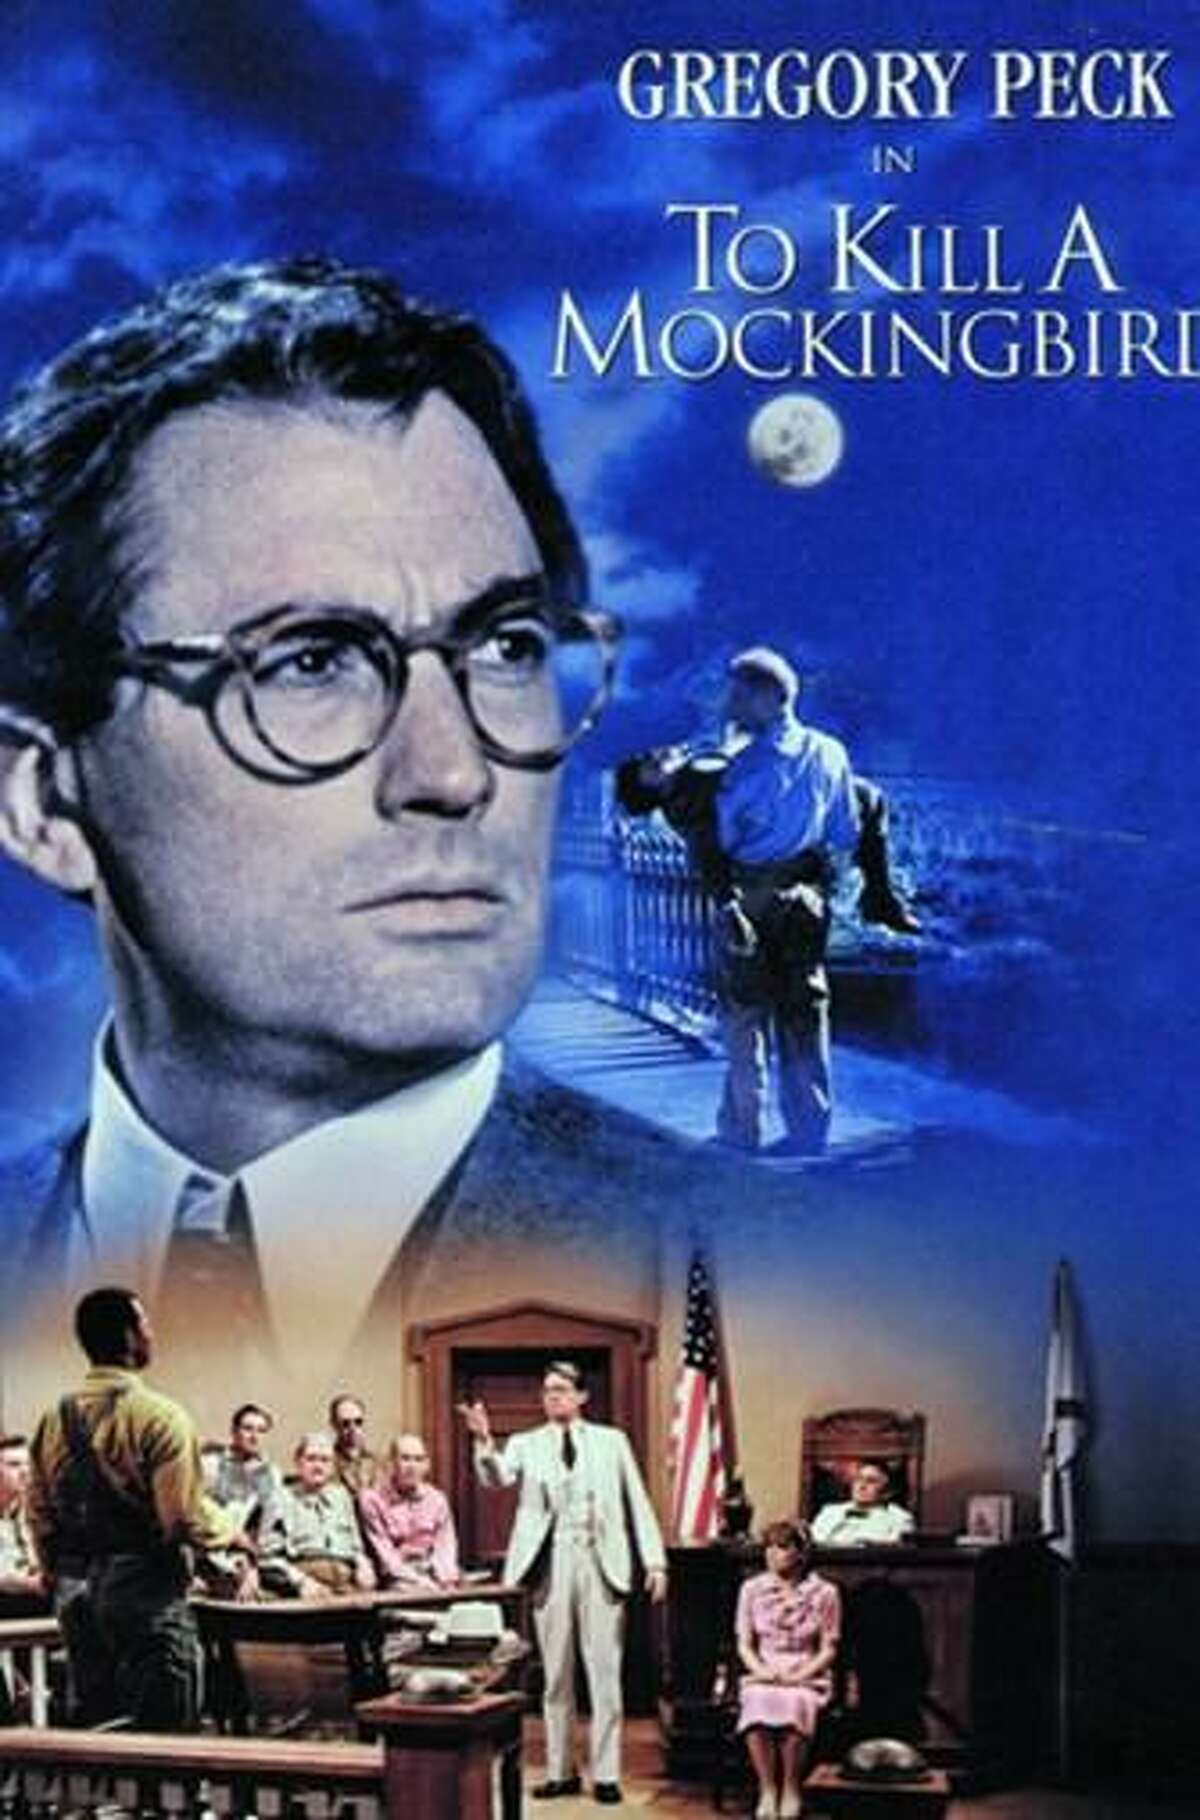 Gregory Peck stars in the film, “To Kill a Mockingbird.”